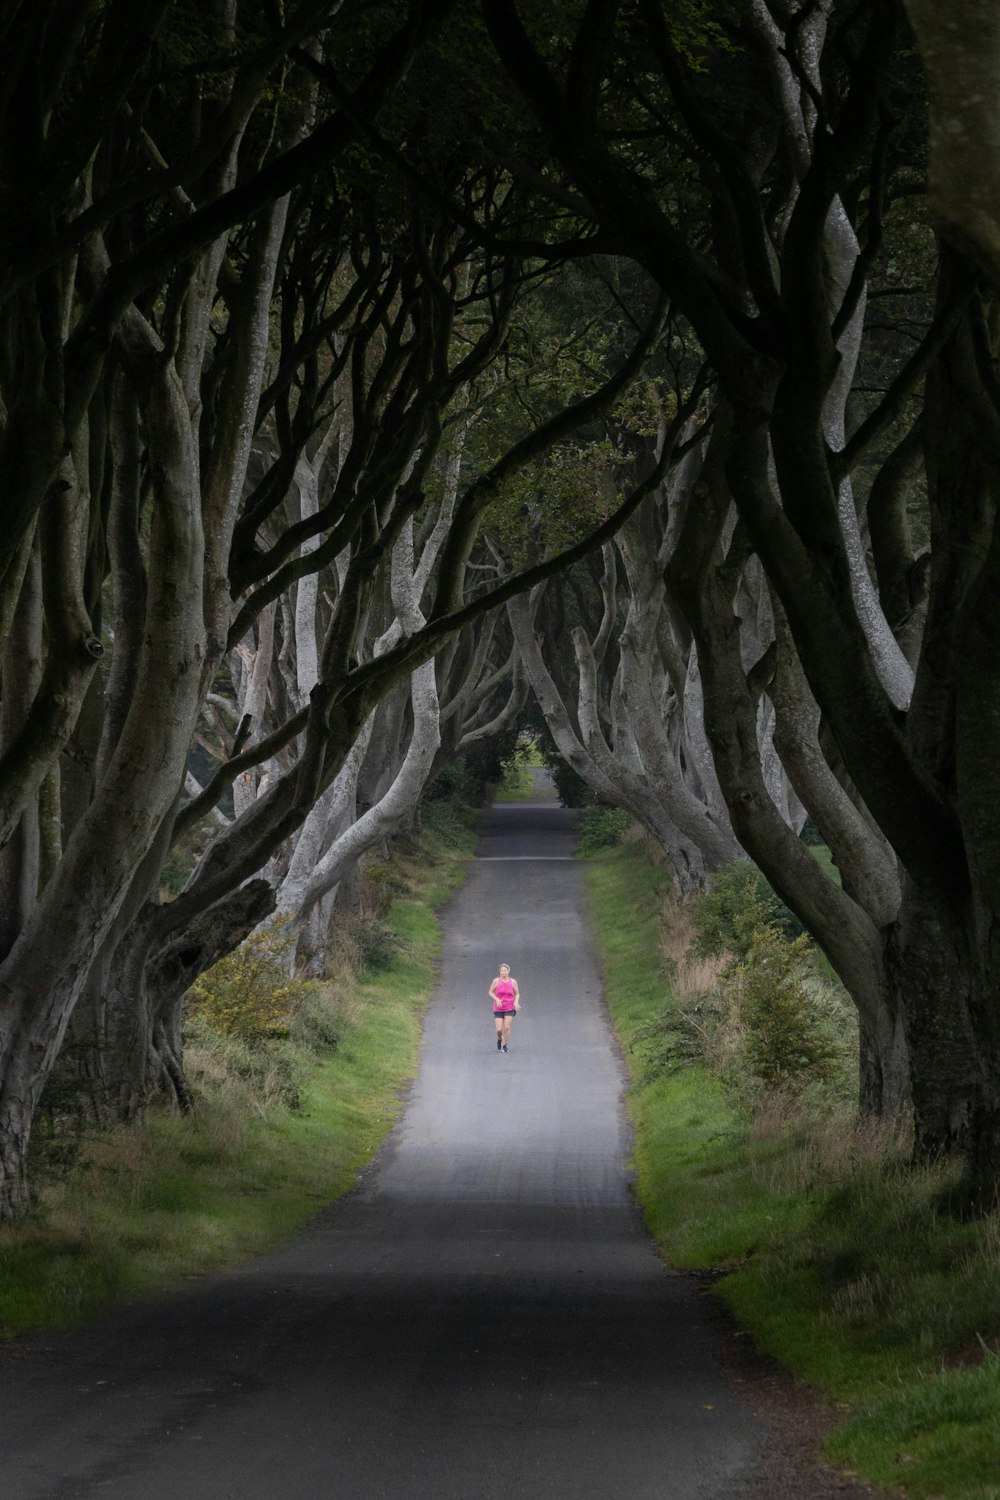 a road lined with trees with a person on a bike